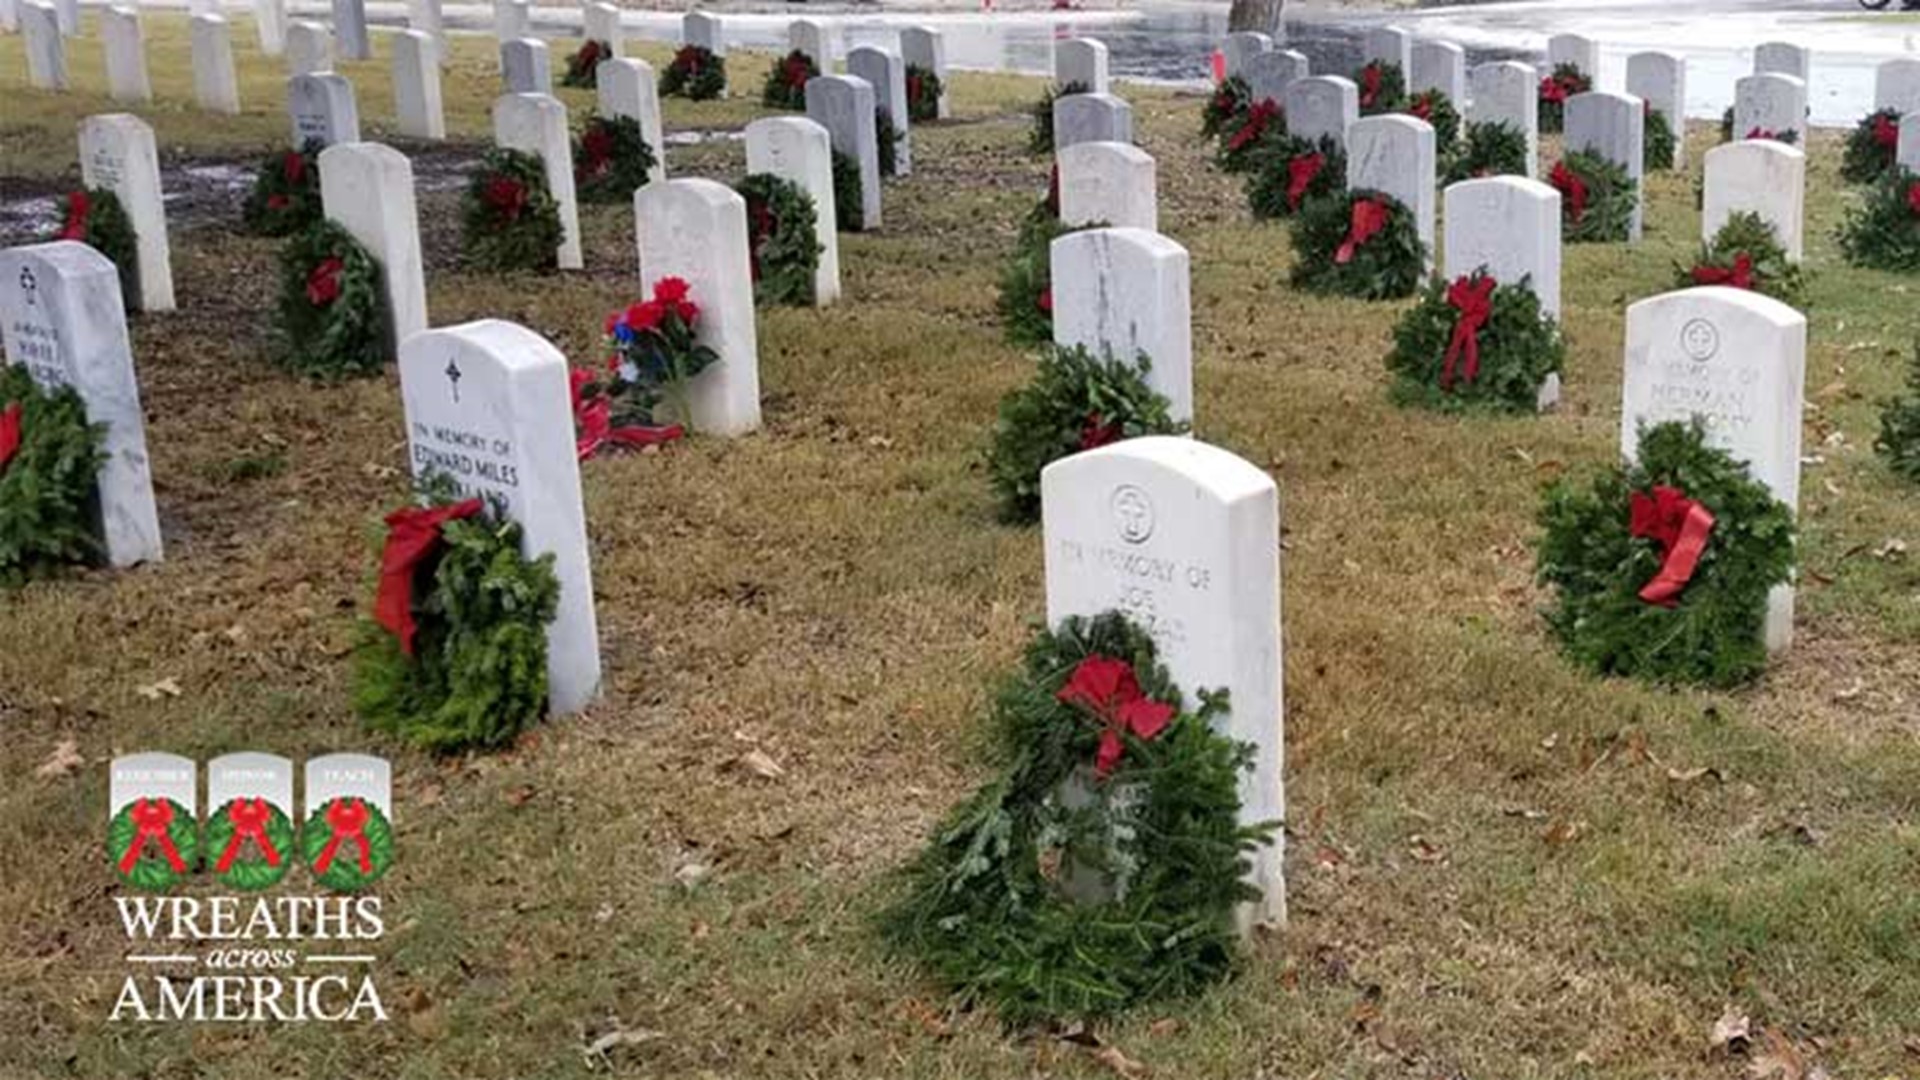 Wreaths Across America will remember our veterans through the laying of remembrance wreaths on the graves of our country's fallen heroes in San Antonio.